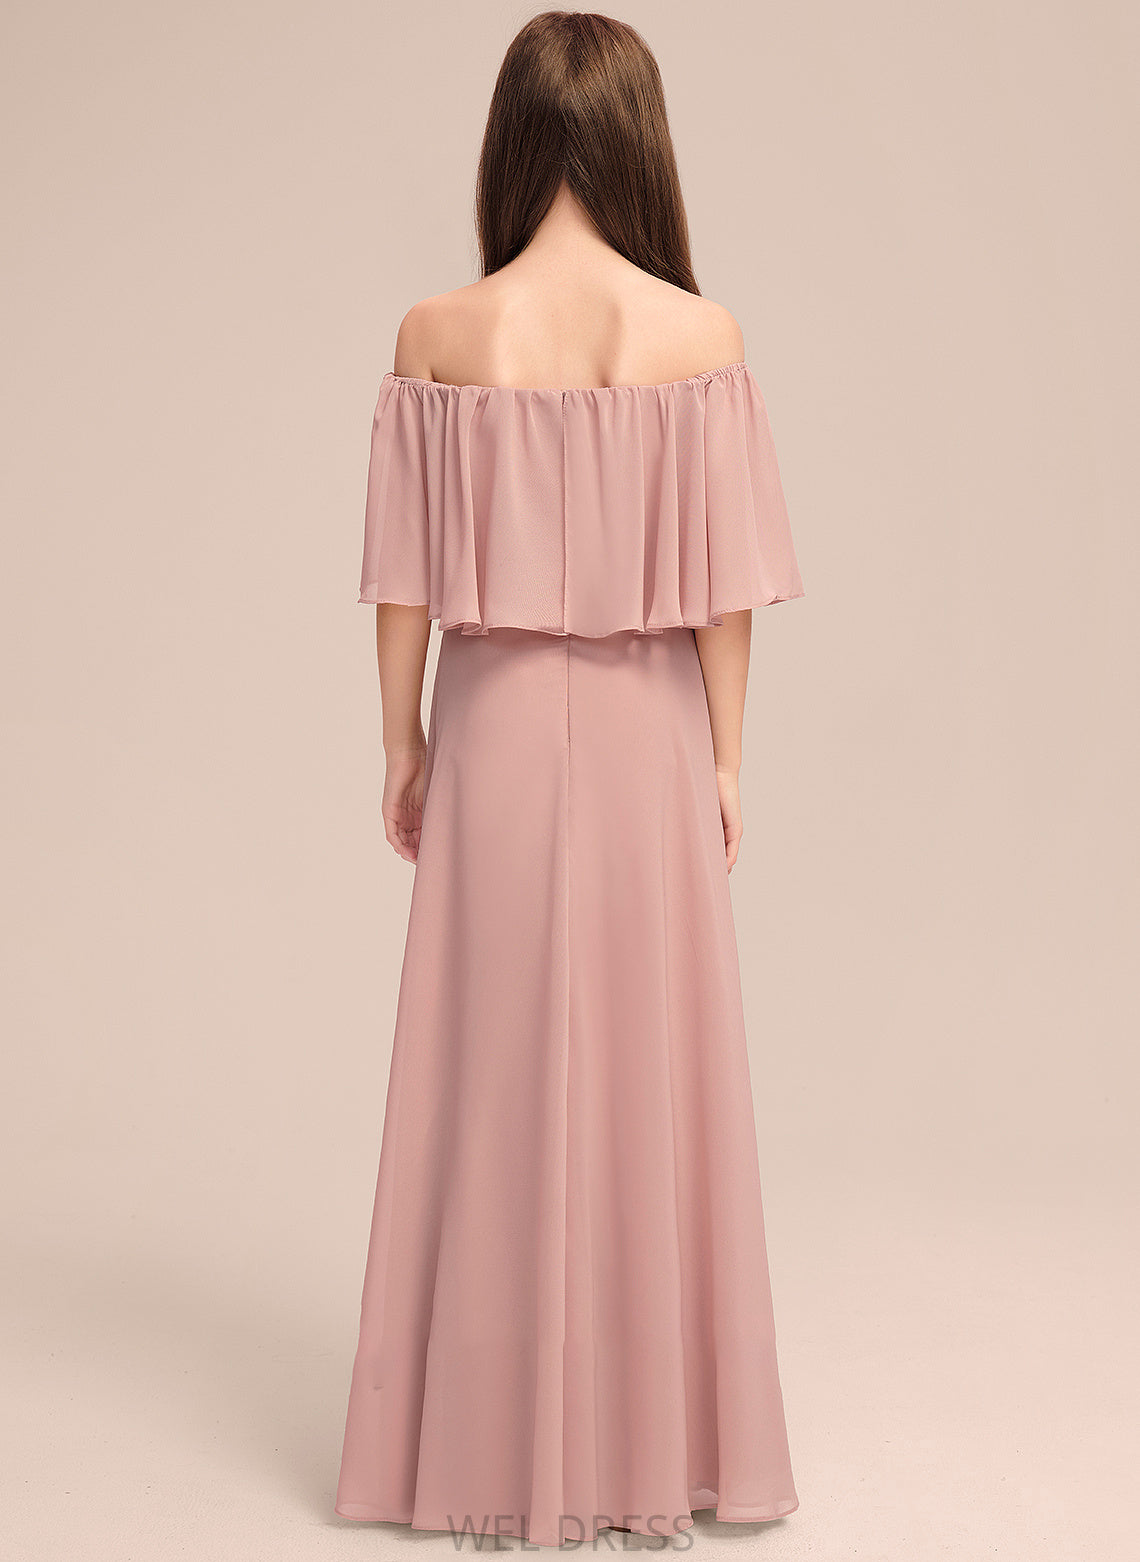 Chiffon With Junior Bridesmaid Dresses Floor-Length A-Line Taliyah Off-the-Shoulder Ruffle